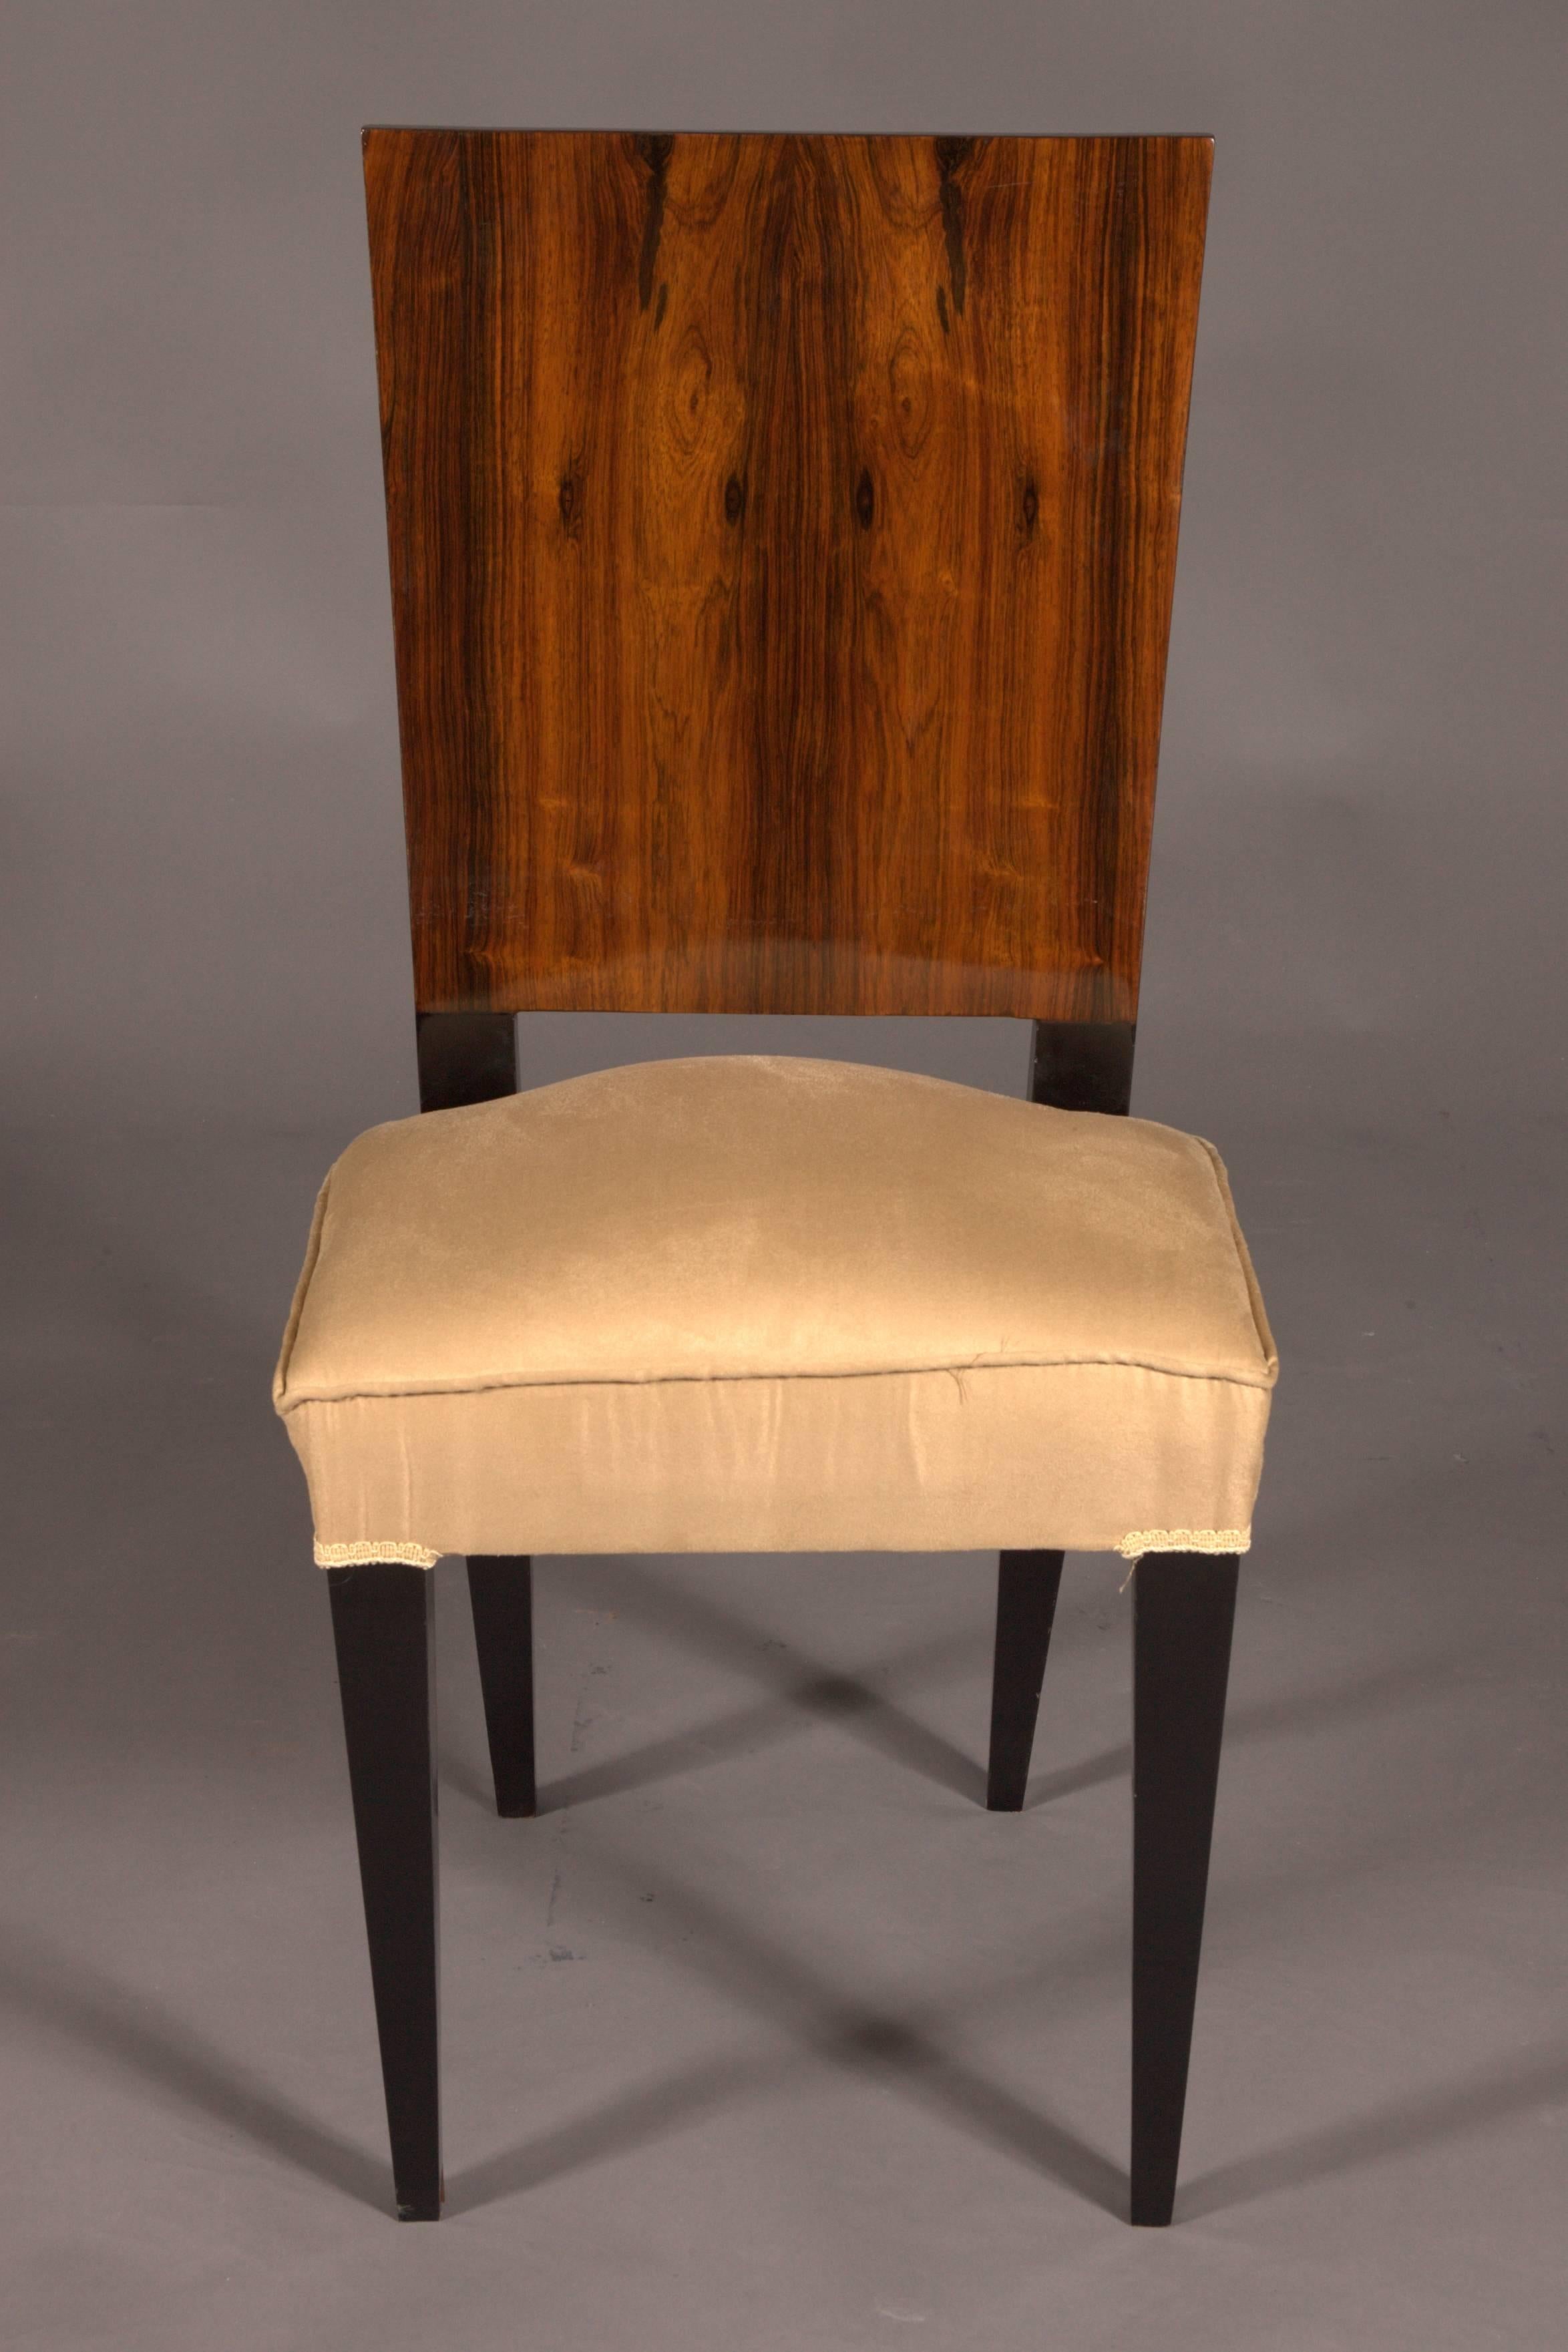 2 Massive beechwood with Mahogany veneer.
Straight frame on tapering squares. High-rectangular, shoulder-shaped backrest frames. Seat surface upholstered and covered.  
Hugh Quality.

On request we have 6 from this beautiful Chairs.
  